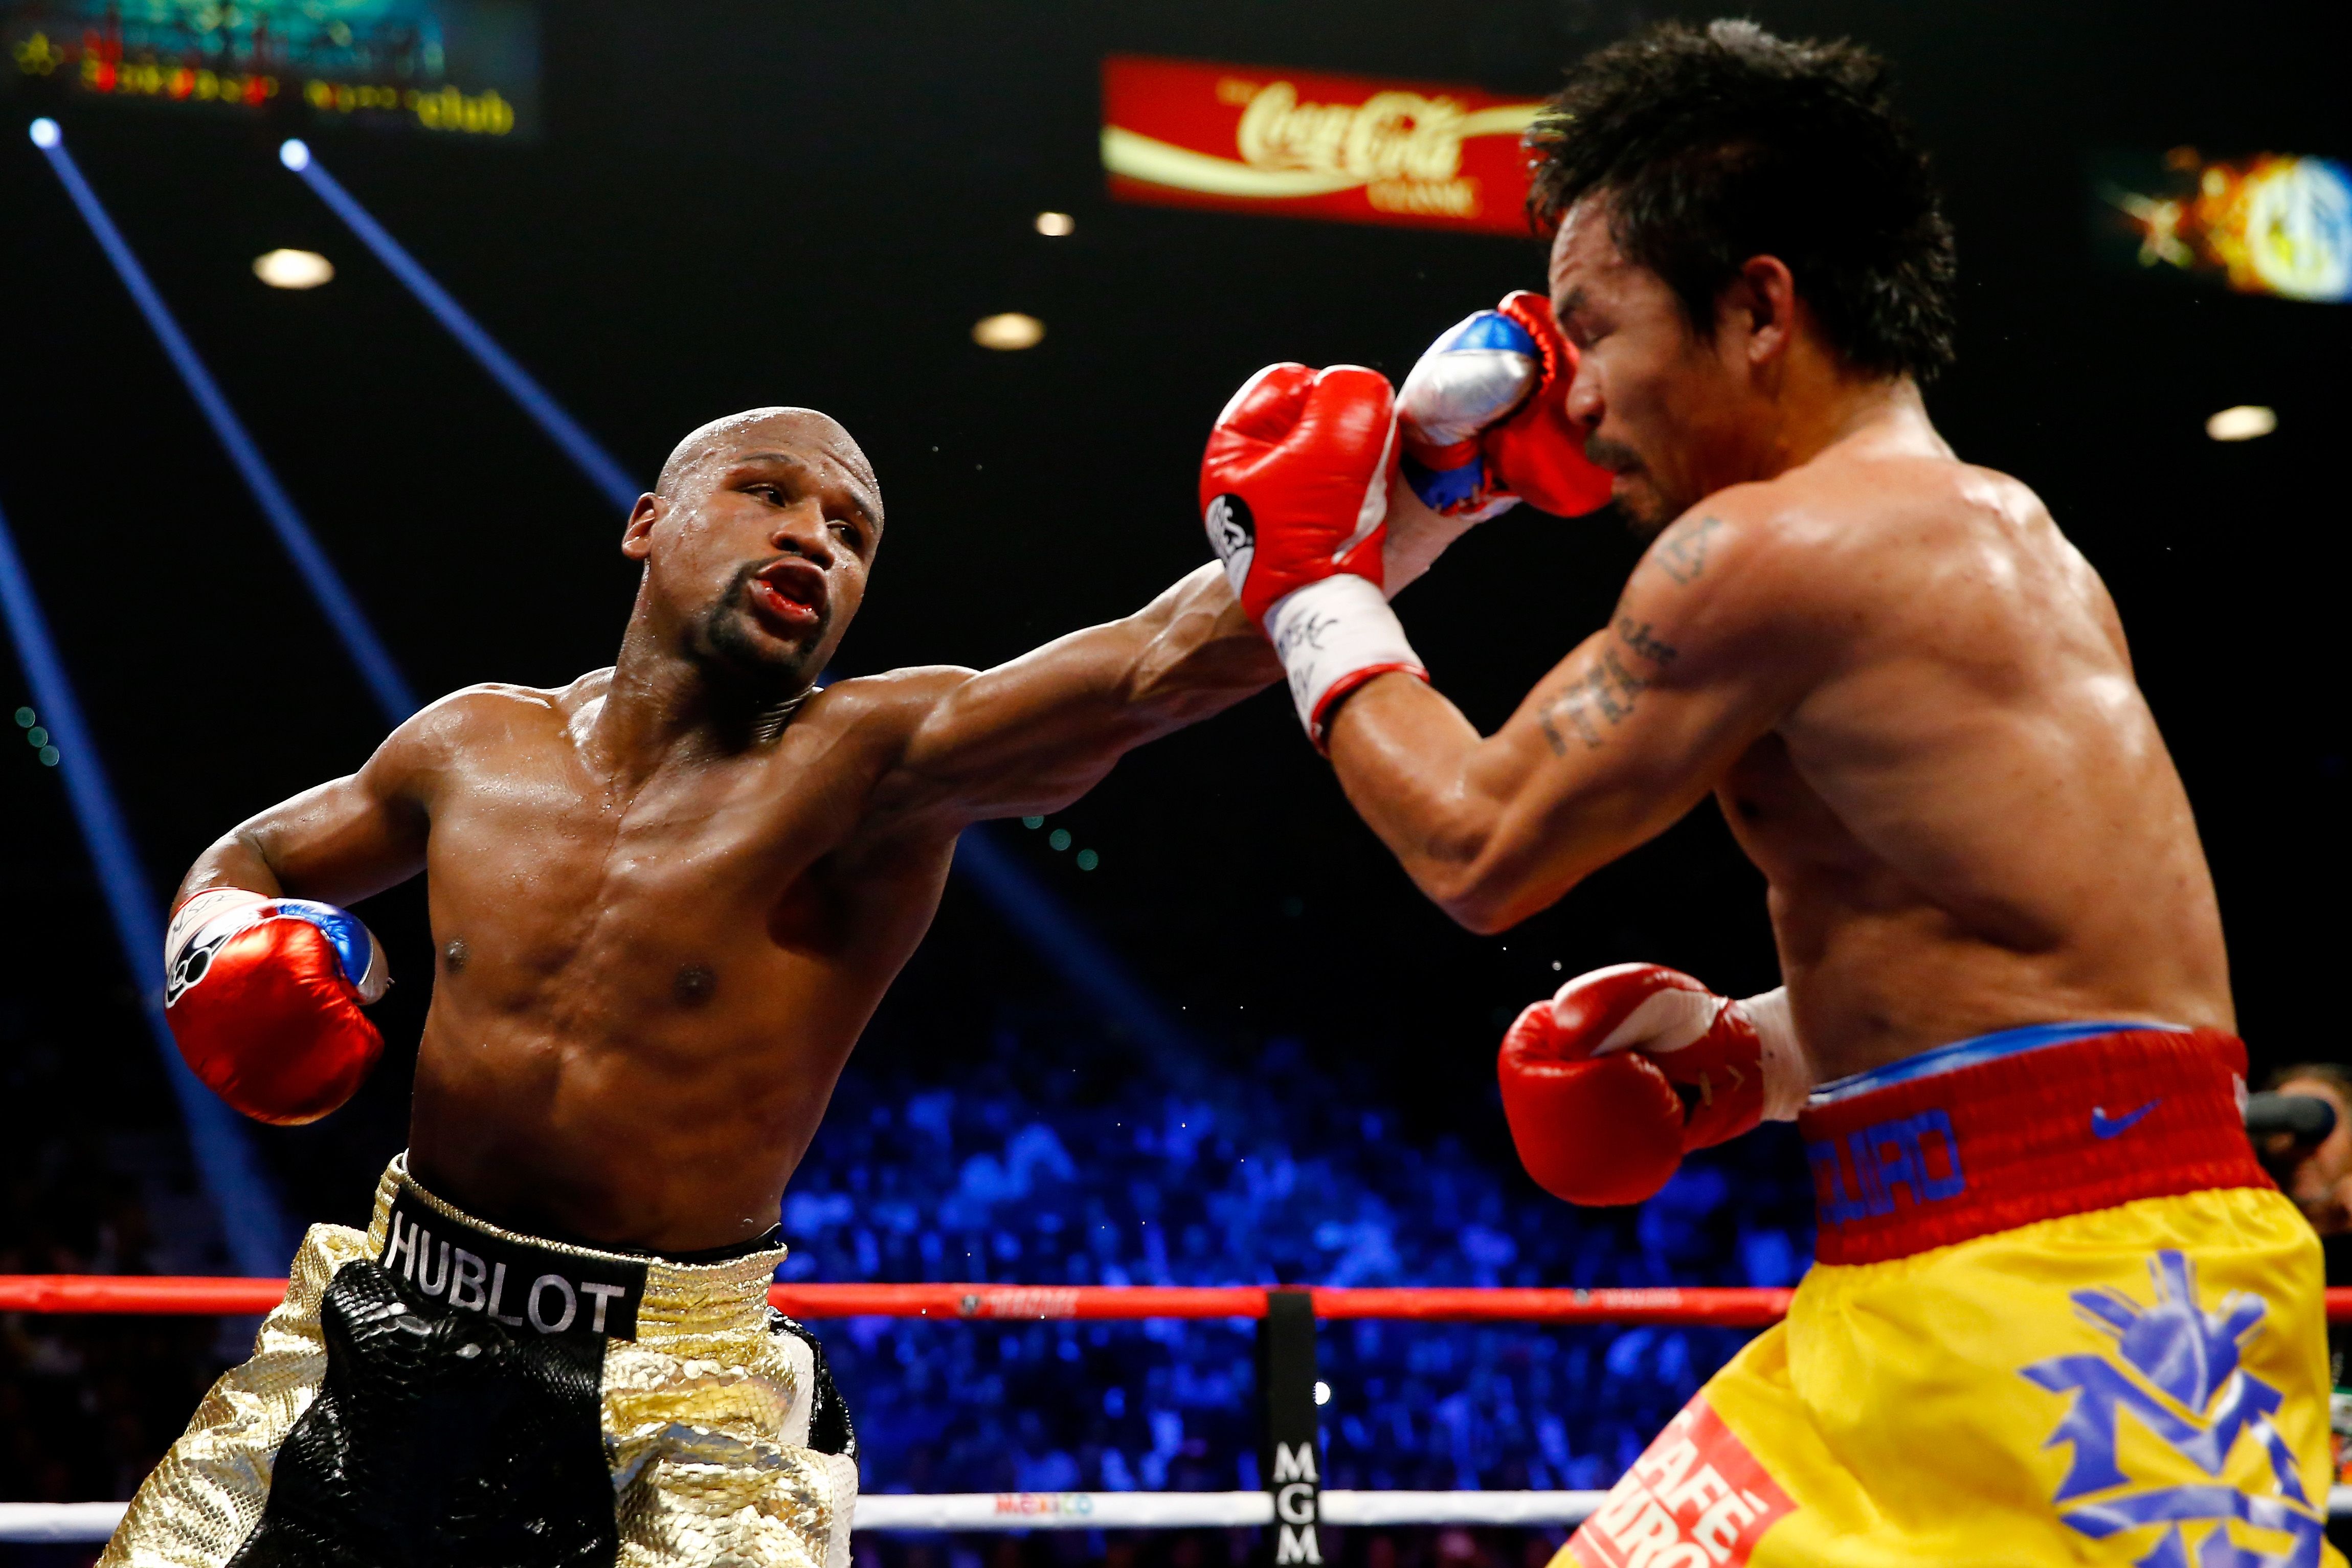 Floyd Mayweather and Manny Pacquiao's fight was boxing at its best